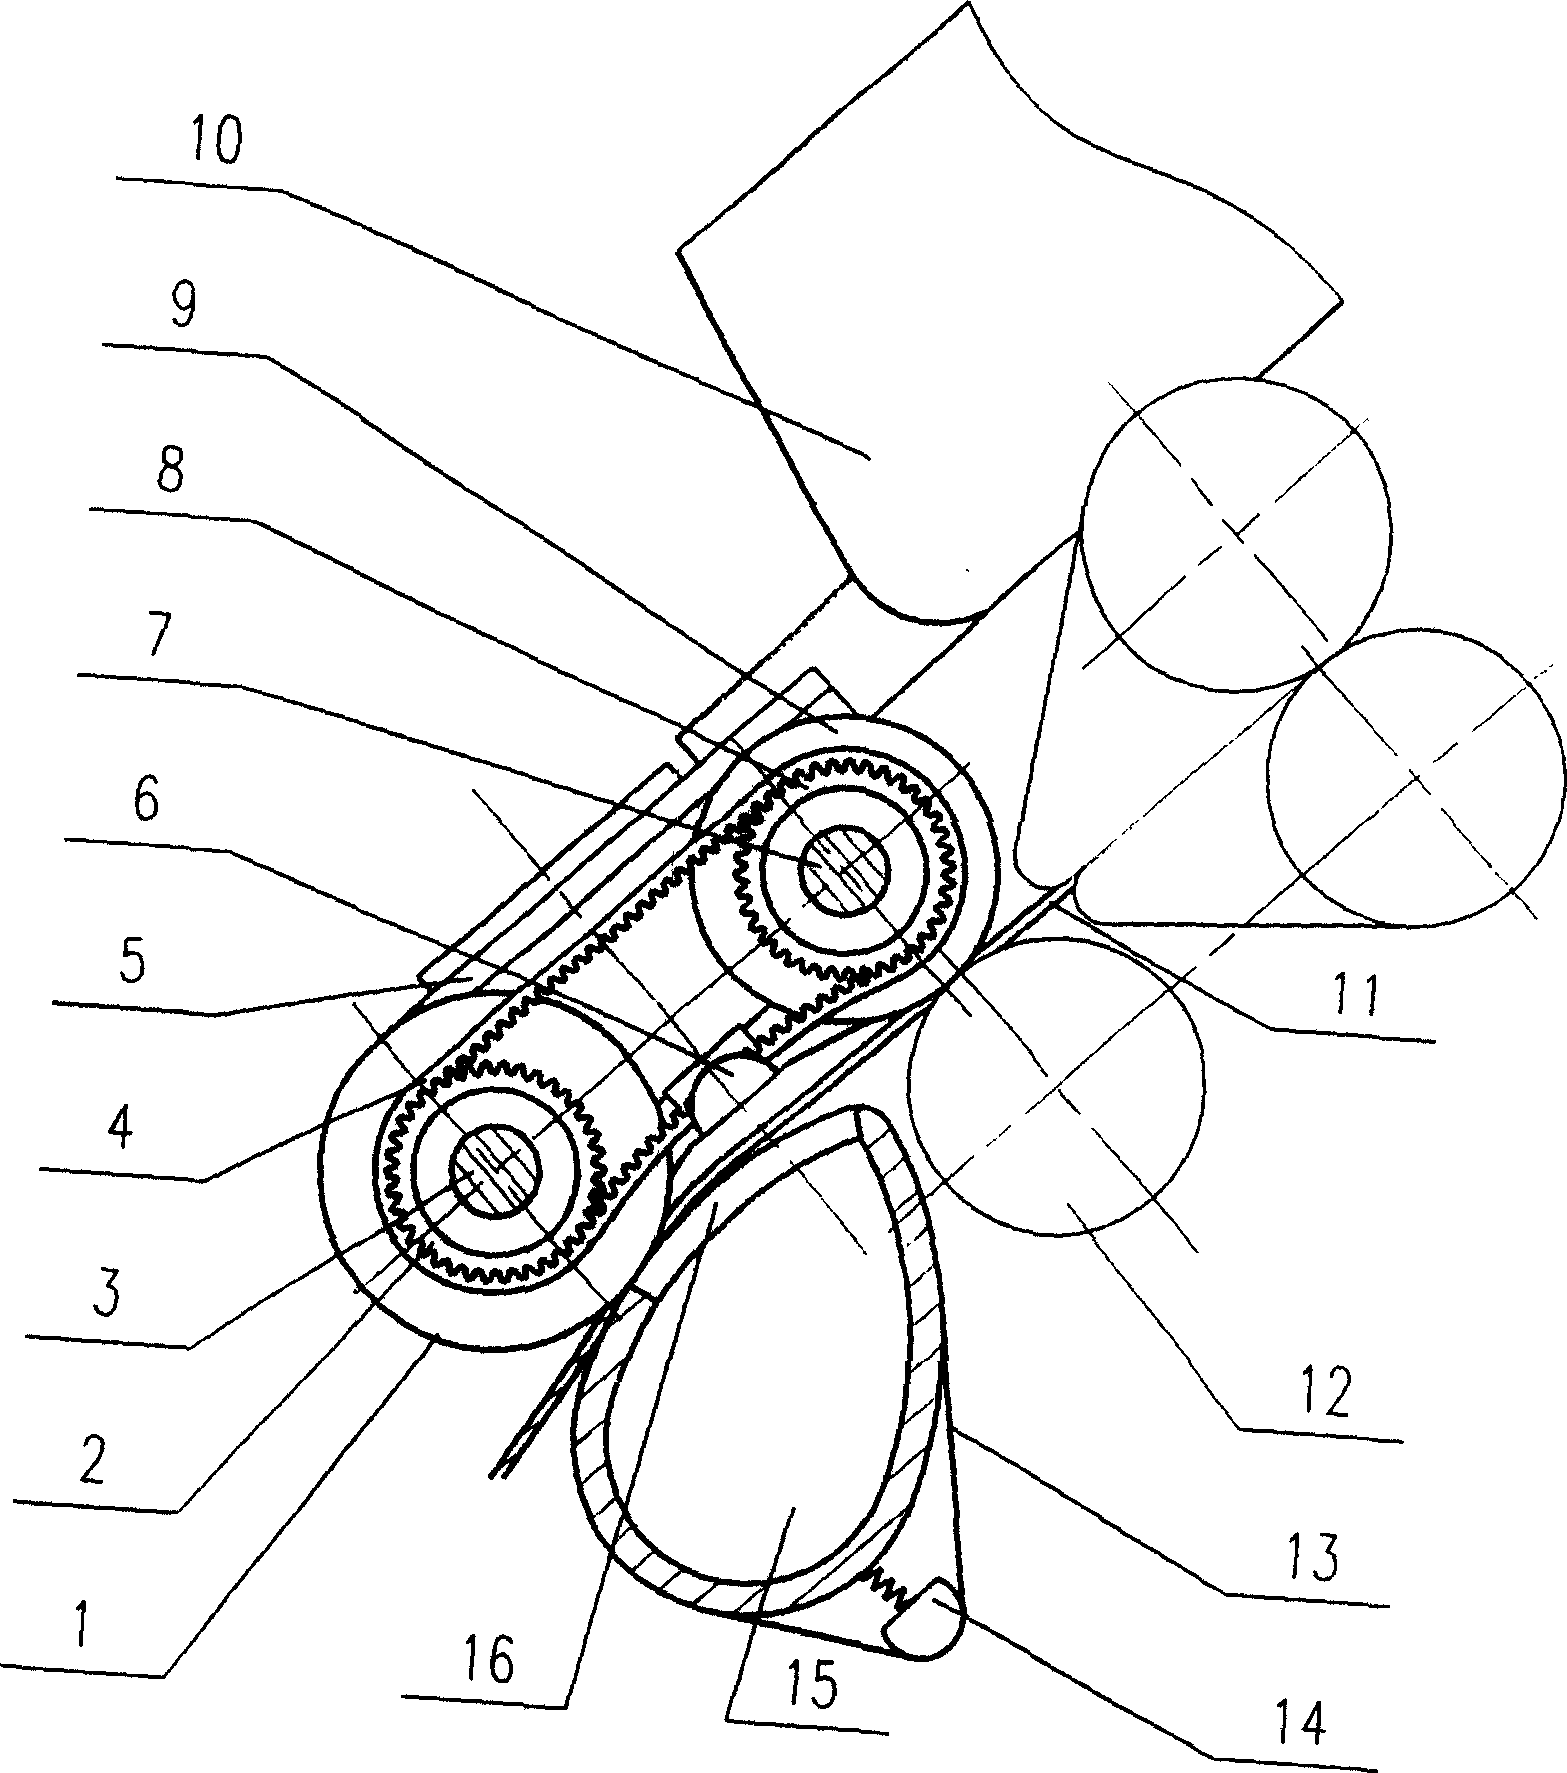 Fiber collecting device for condensed ring spinner